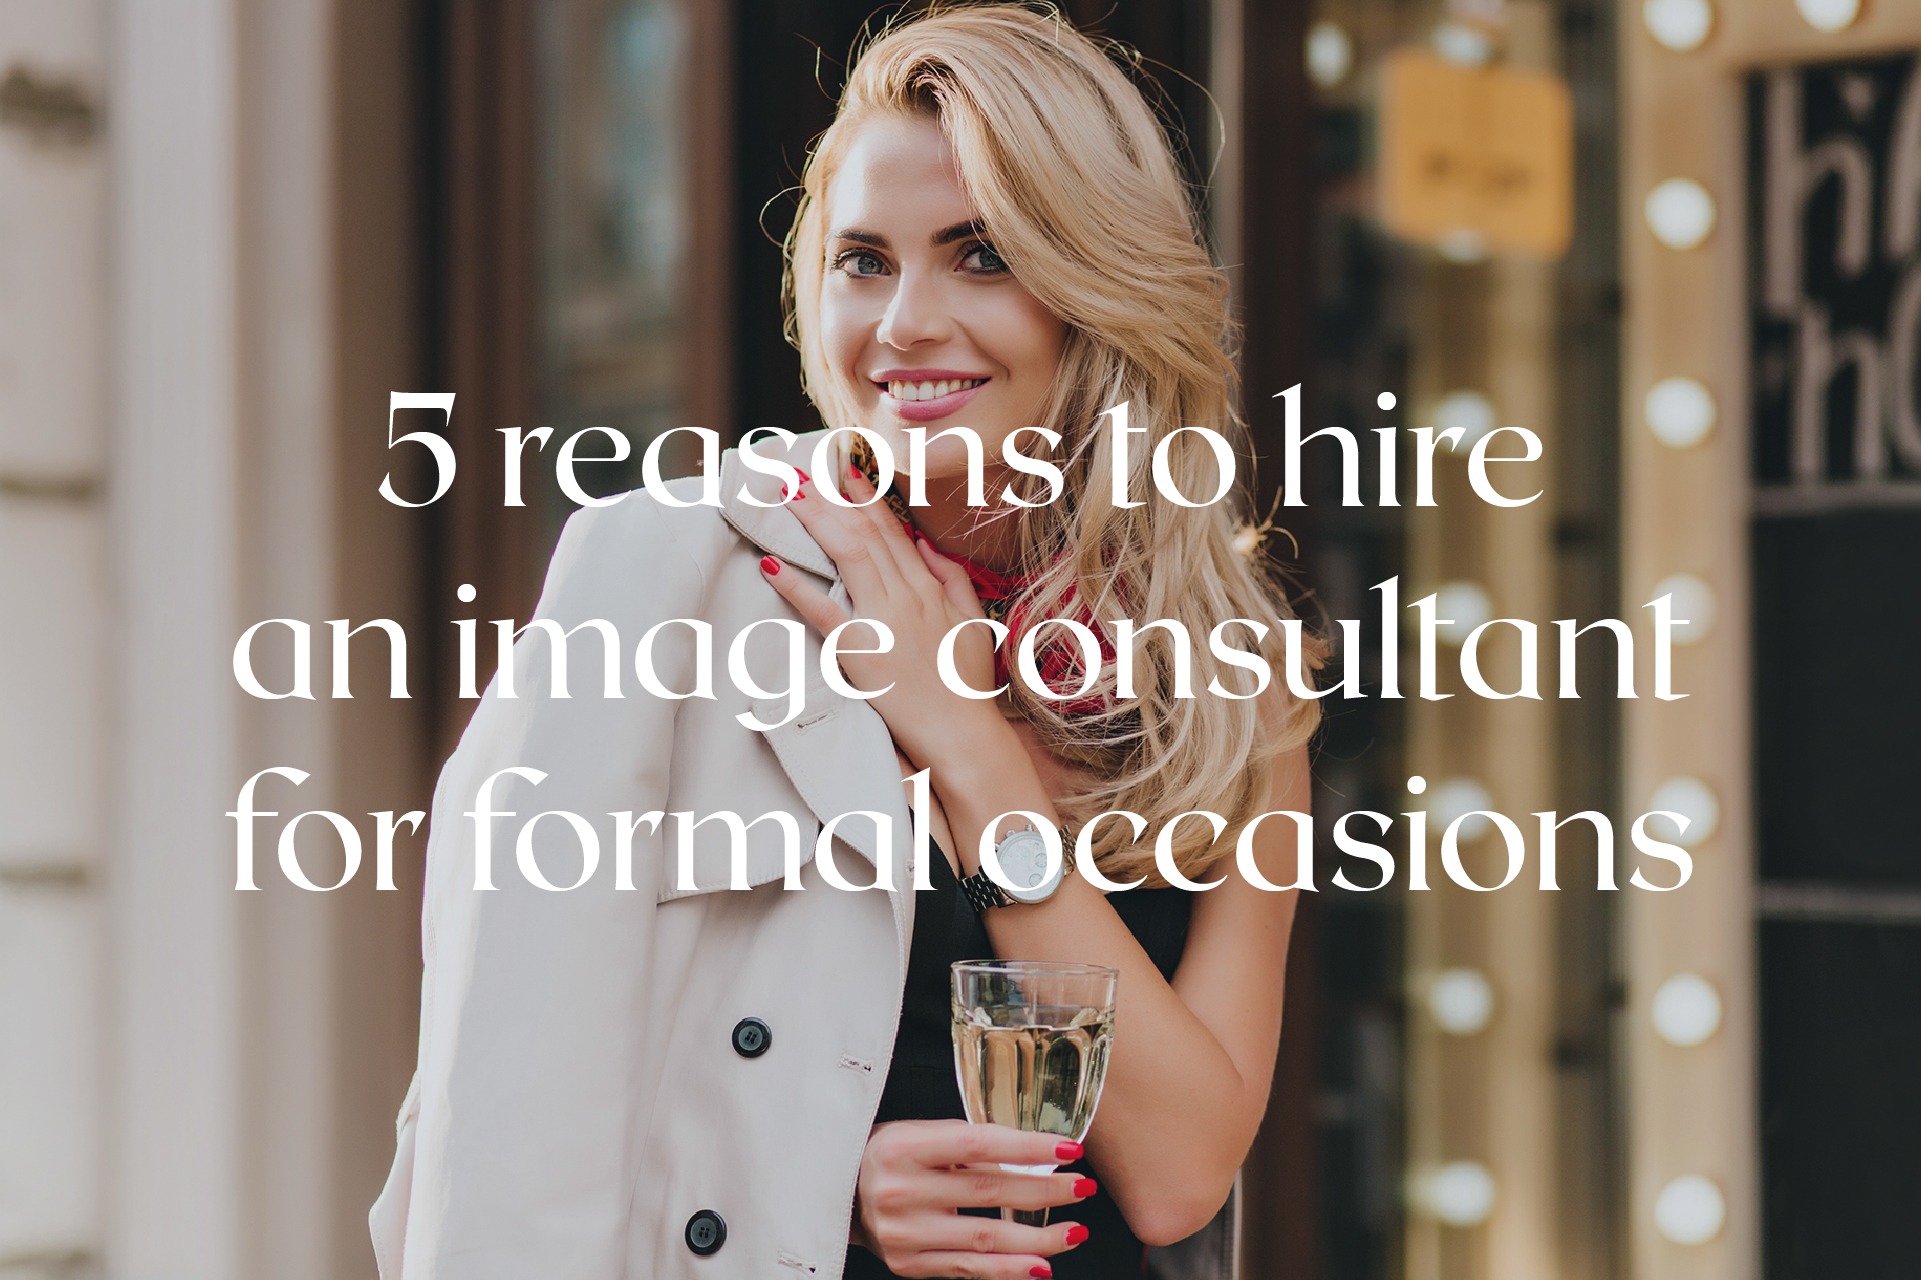 Formal occasions: Why you need an image consultant